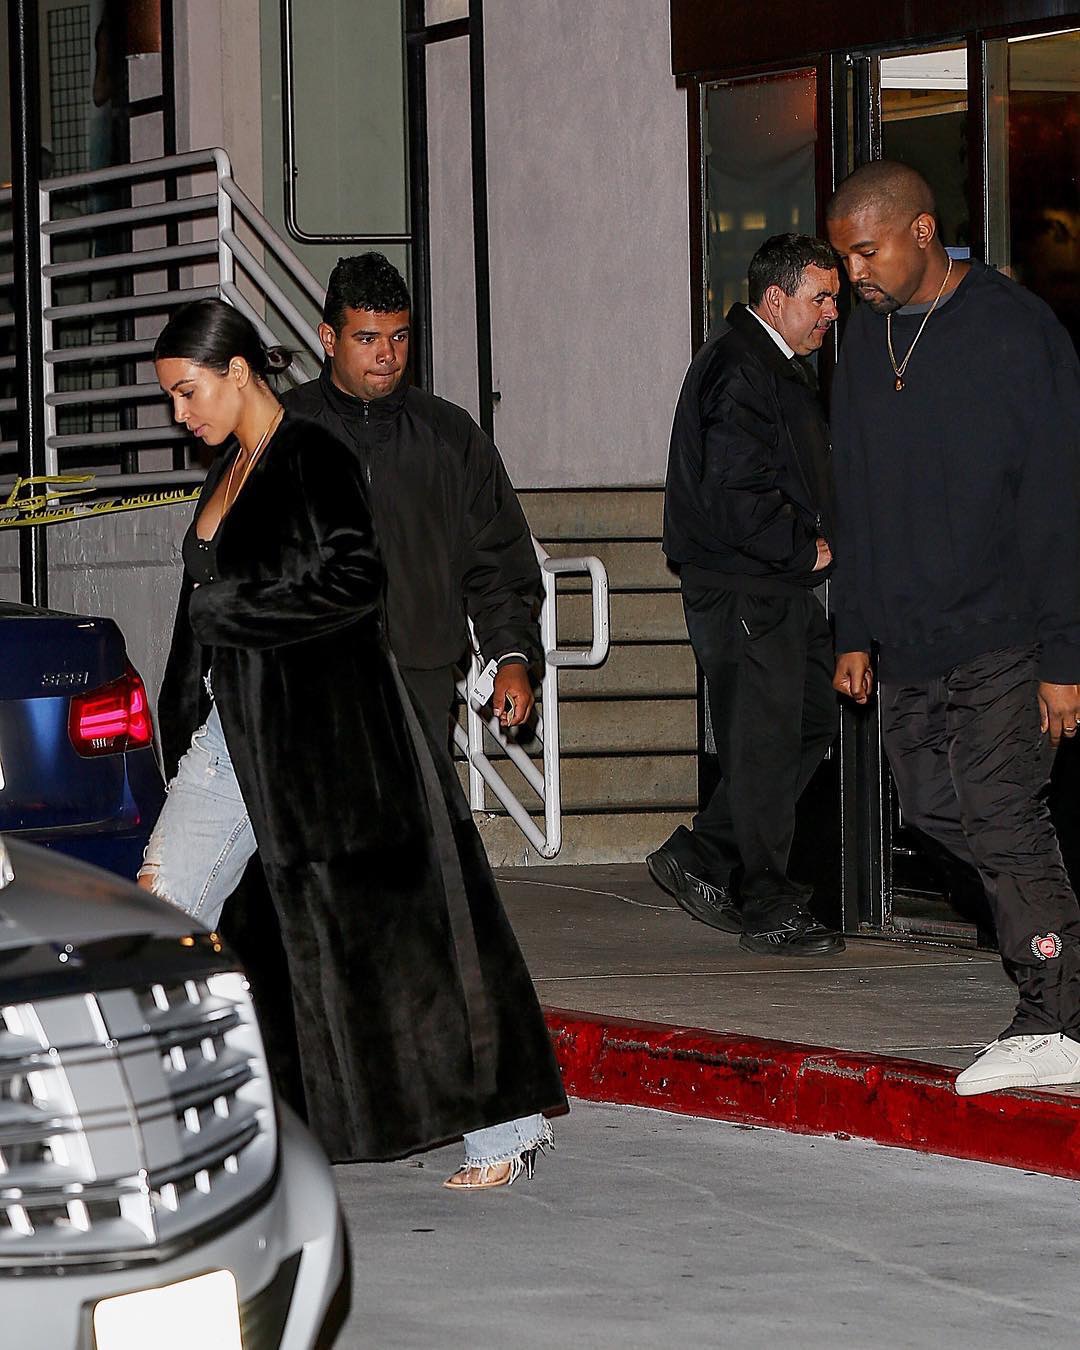 Mangle Maneuver fossil SPOTTED: Kanye West In Adidas Calabasas Yeezy Pants And Sneakers – PAUSE  Online | Men's Fashion, Street Style, Fashion News & Streetwear